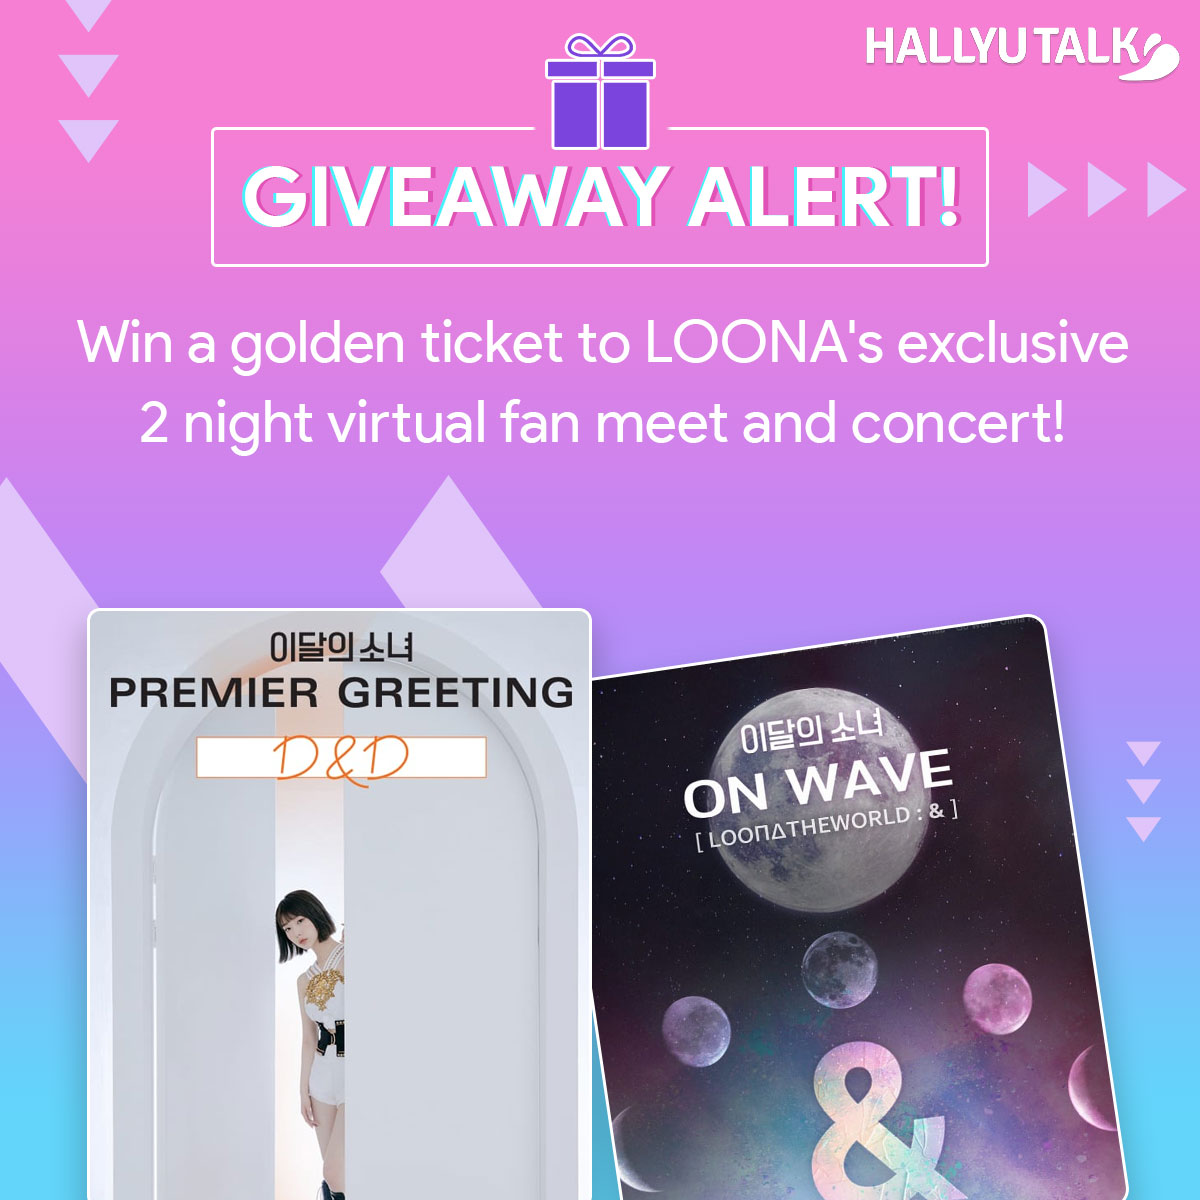 GIVEAWAY ALERT: Win a golden ticket to LOONA’s exclusive 2 night virtual fan meet and concert 